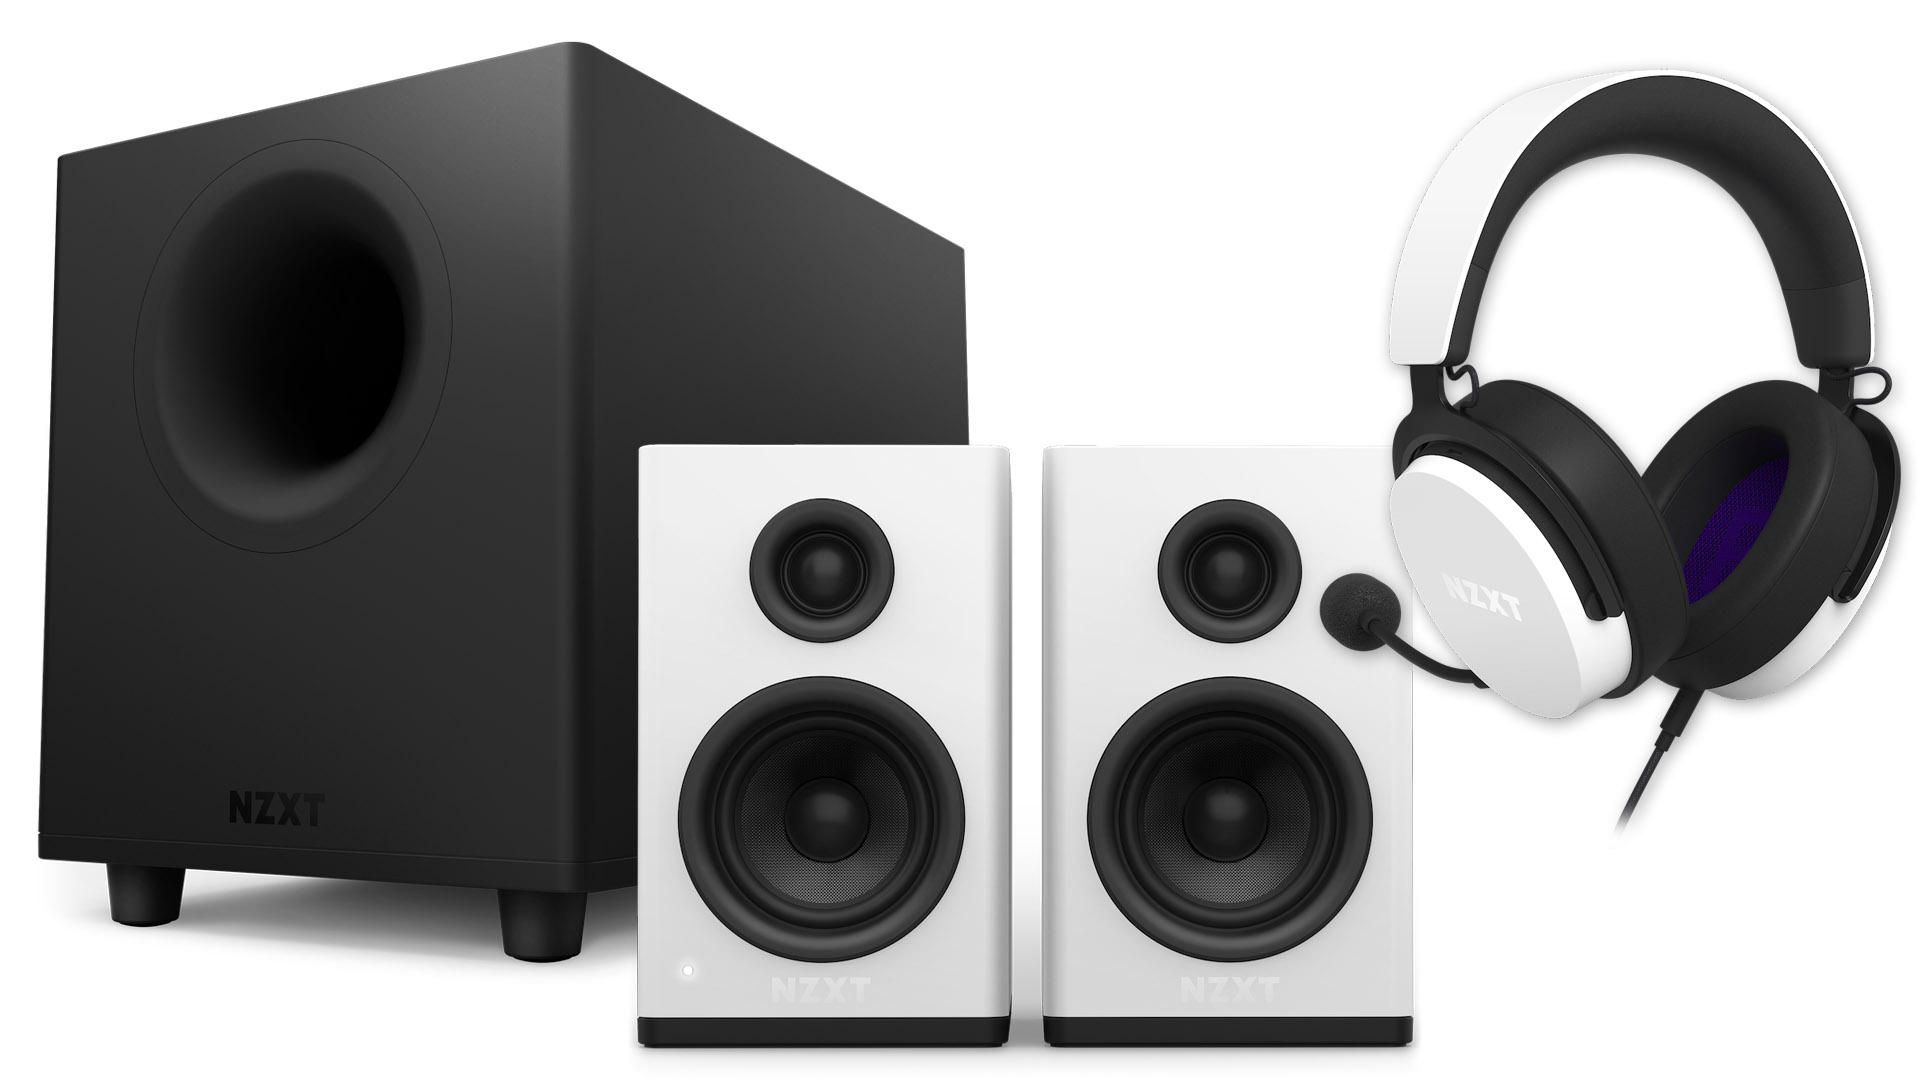 nzxt relay audio speakers and headsets